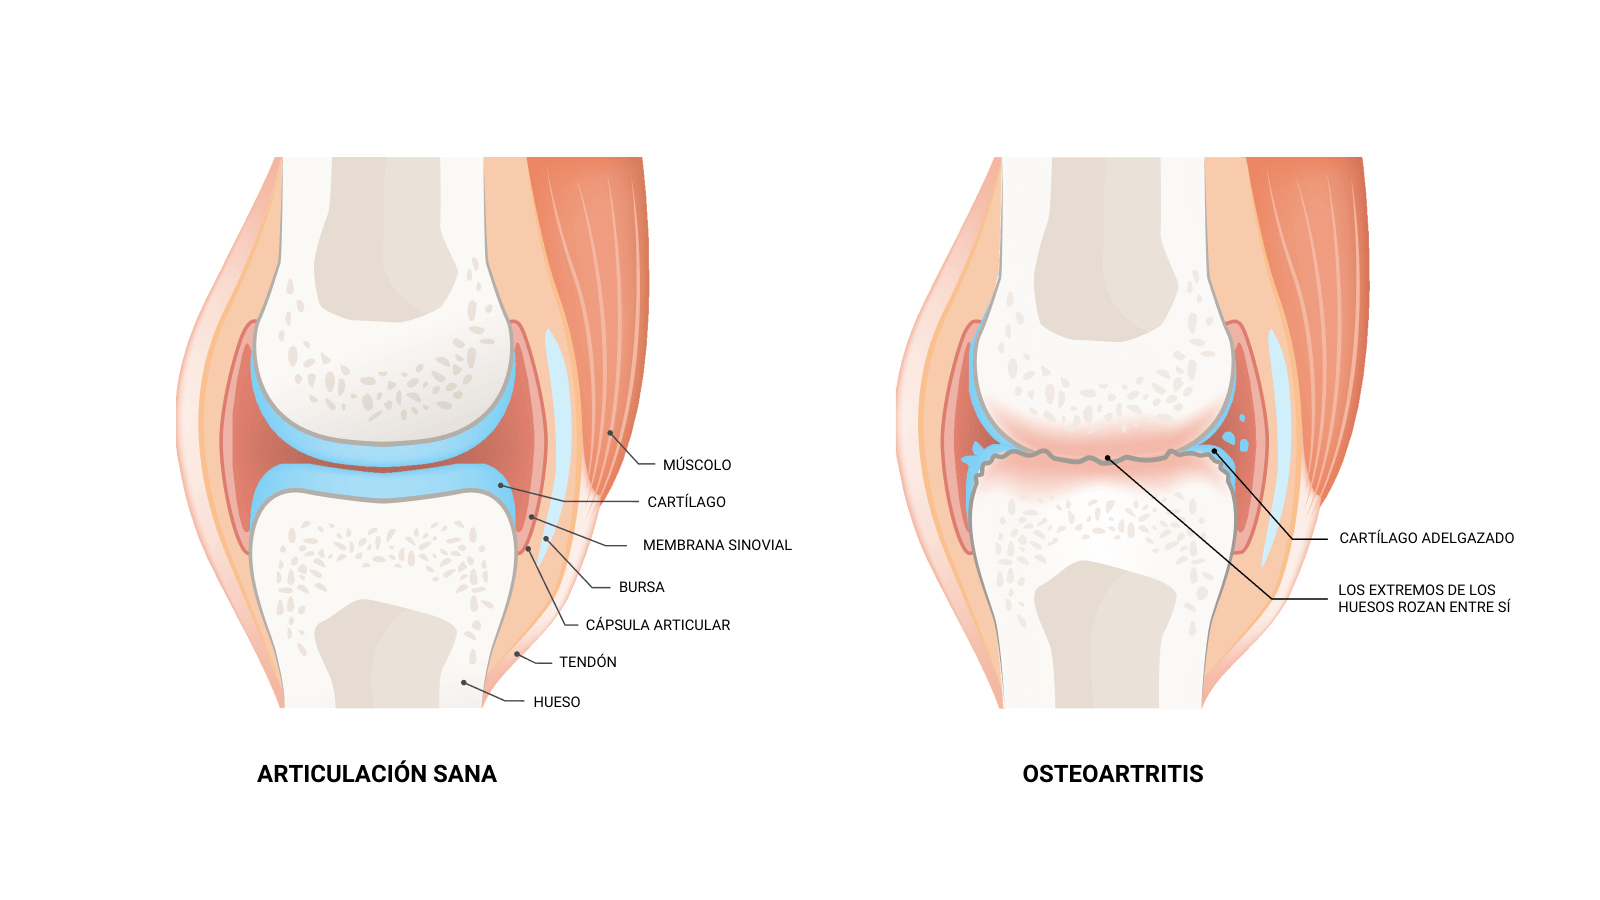 comparison between an healthy joint and a joint with osteoarthritis